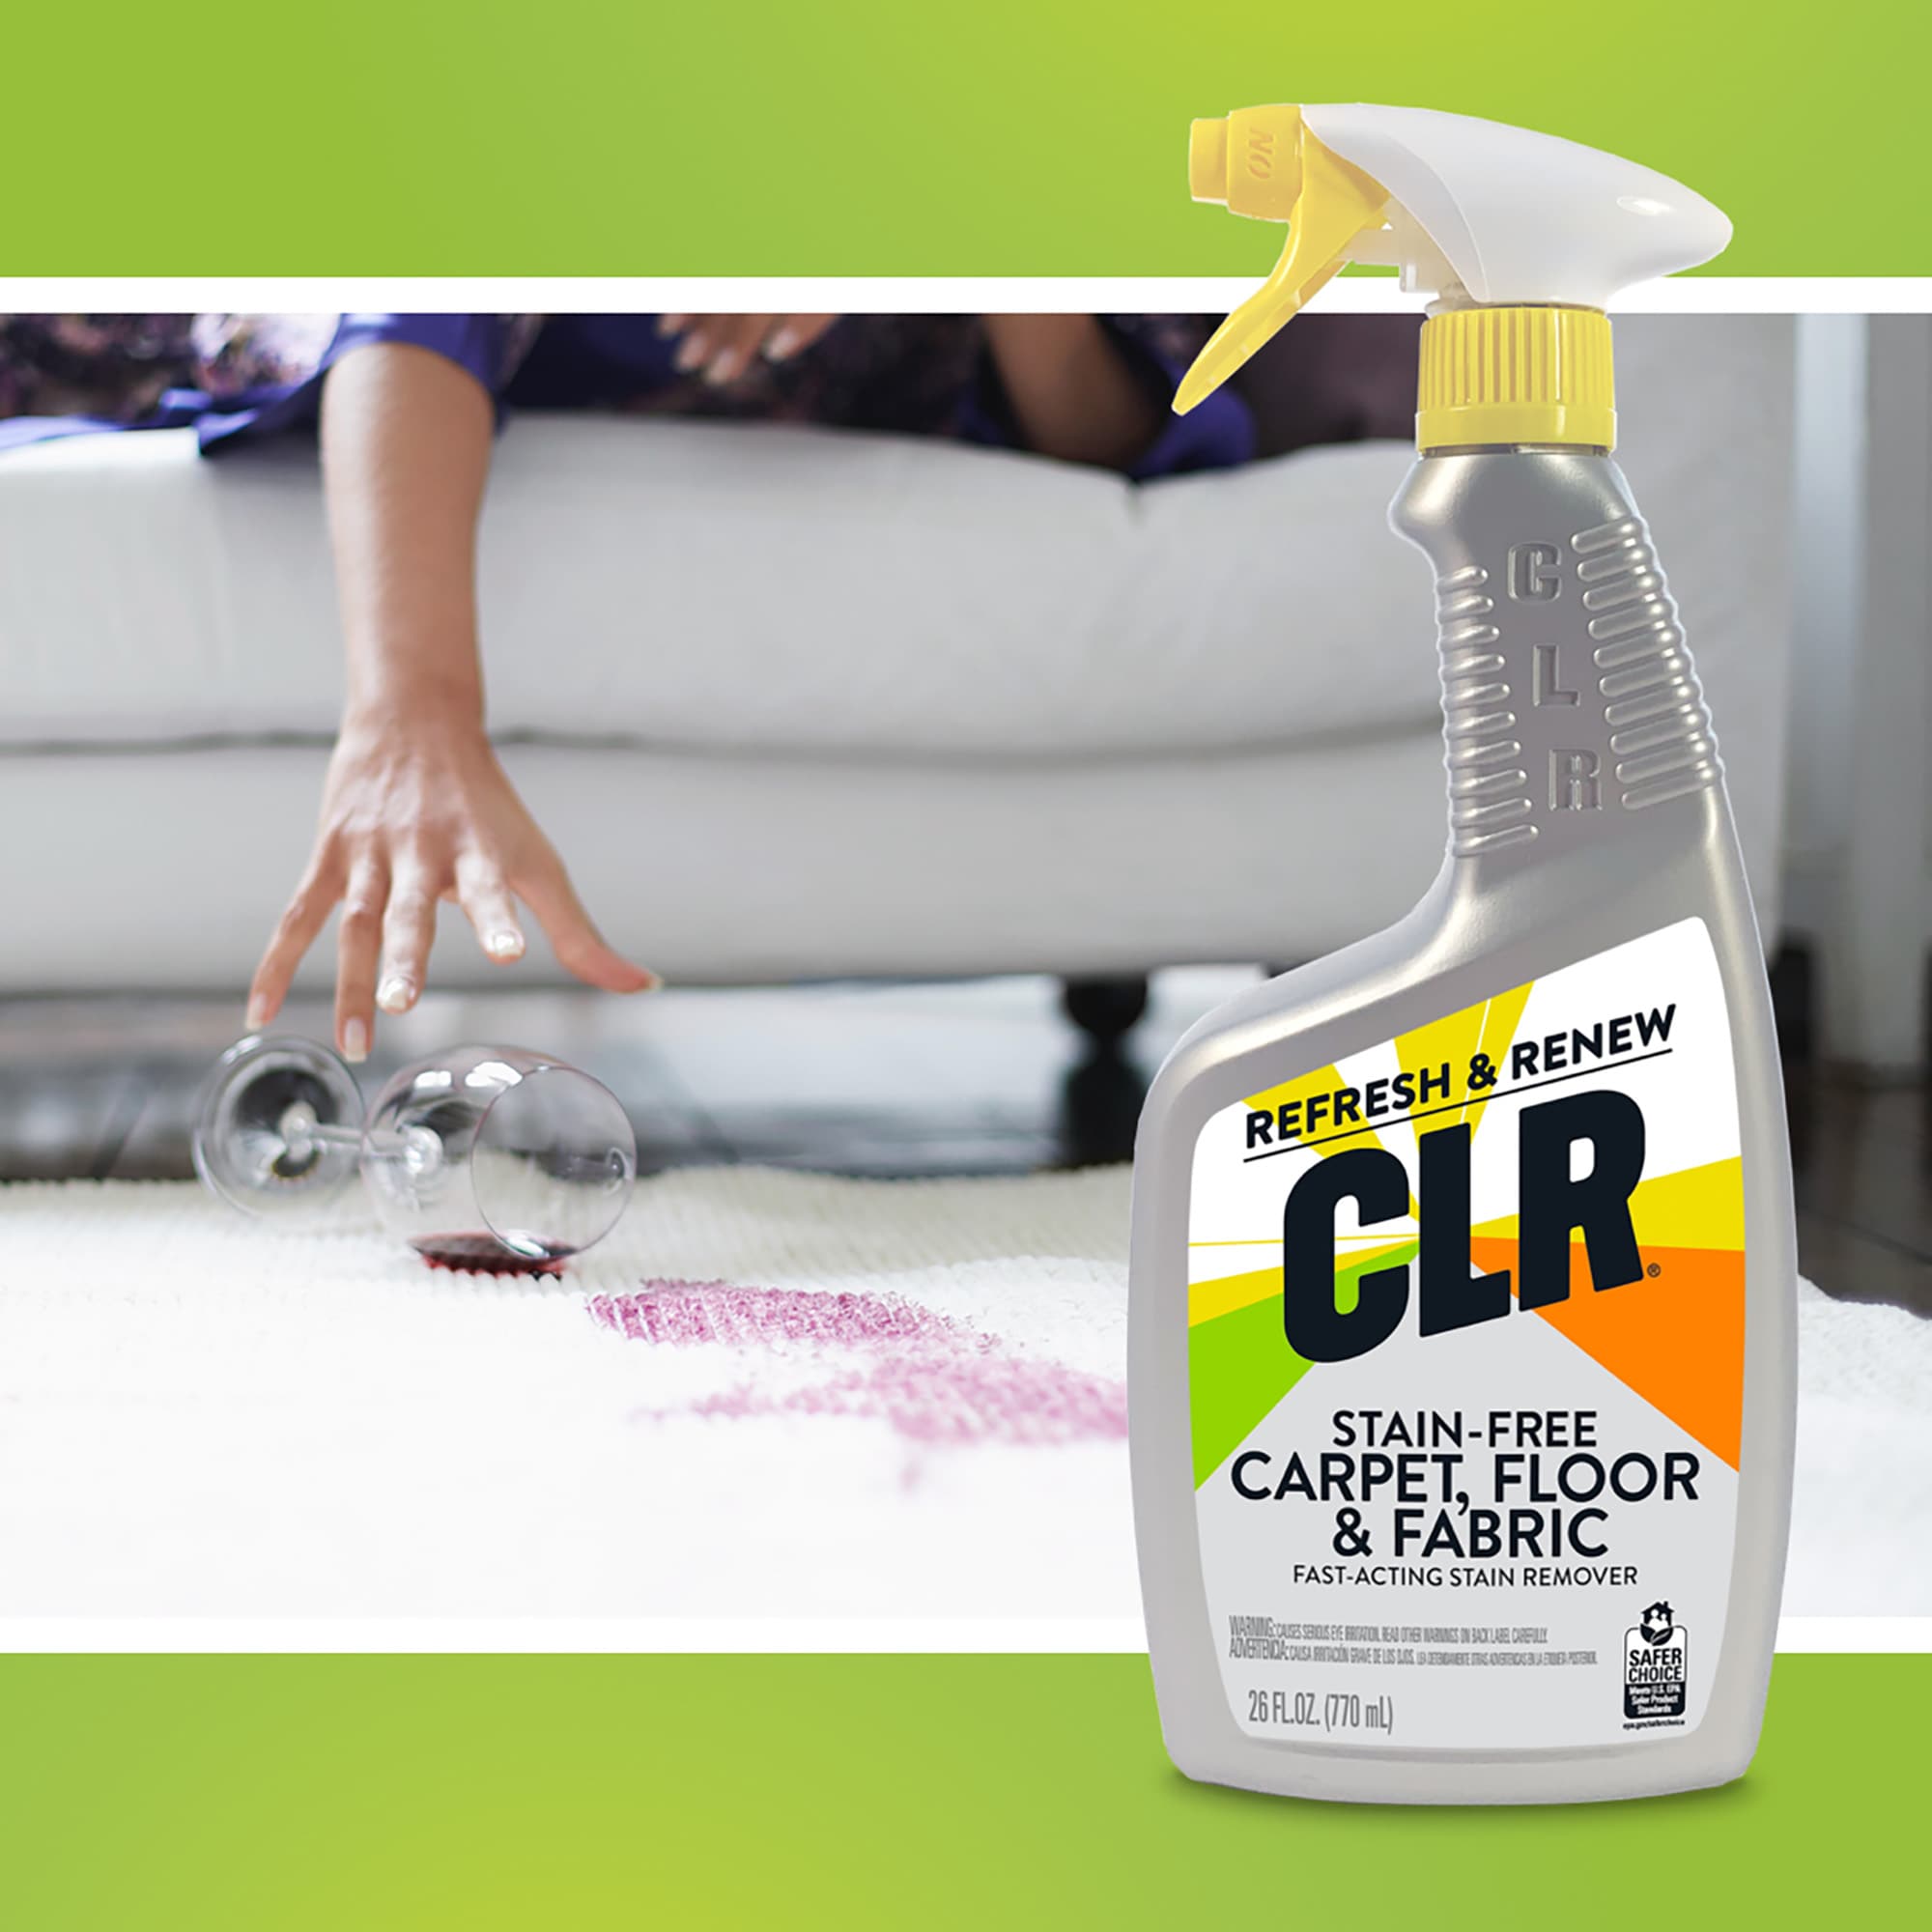 CLR 28-oz Calcium, Lime, and Rust Remover - Powerful Non-Toxic